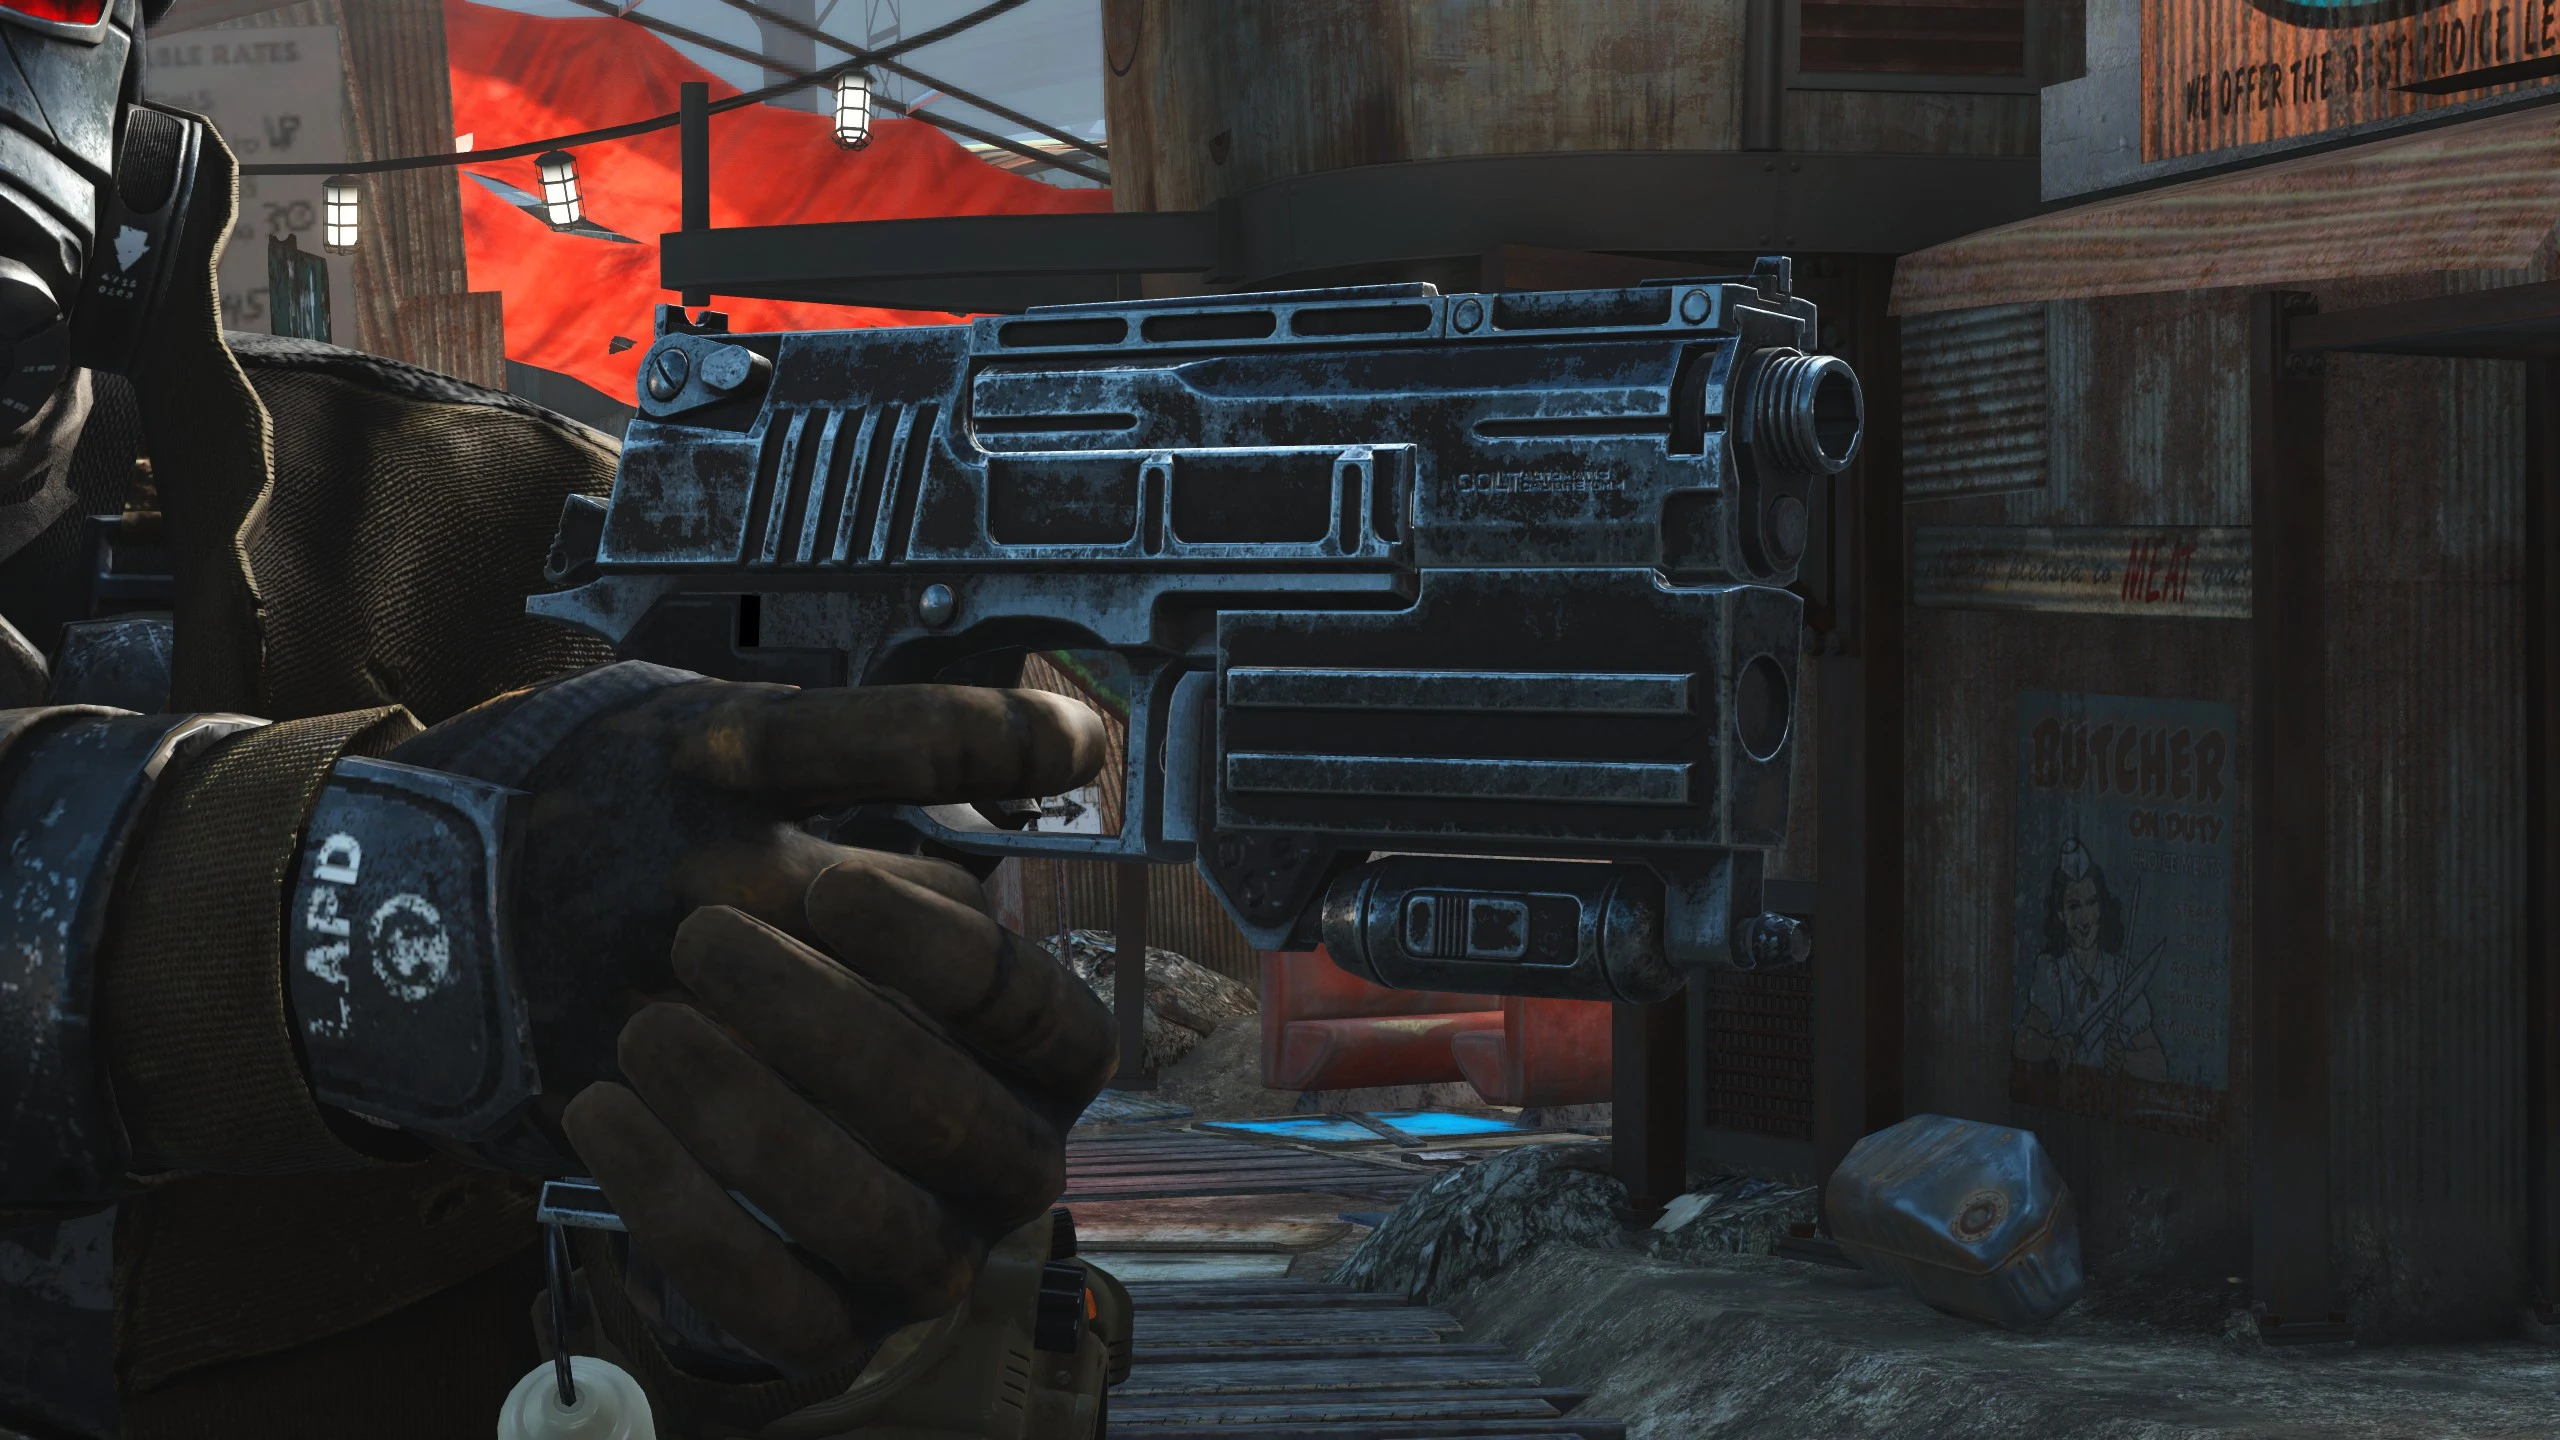 10mm pistol reanimation pack fallout 4 фото 109